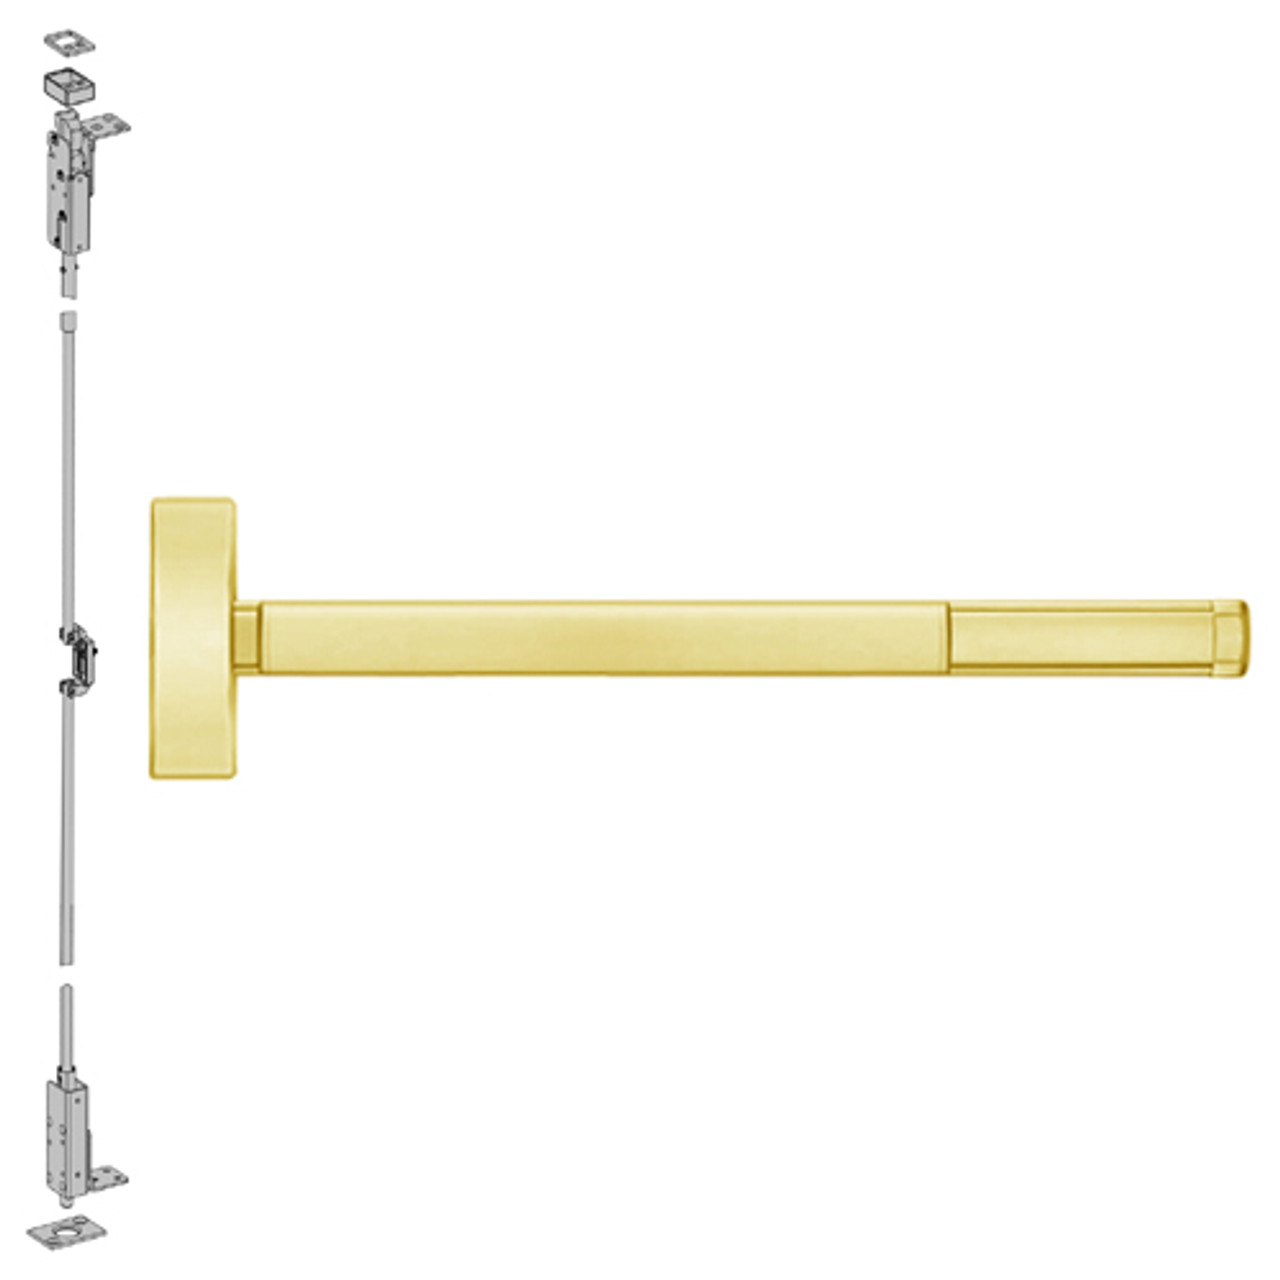 ELR2702LBR-605-36 PHI 2700 Series Wood Door Concealed Vertical Exit Device with Electric Latch Retraction Prepped for Dummy Trim in Bright Brass Finish